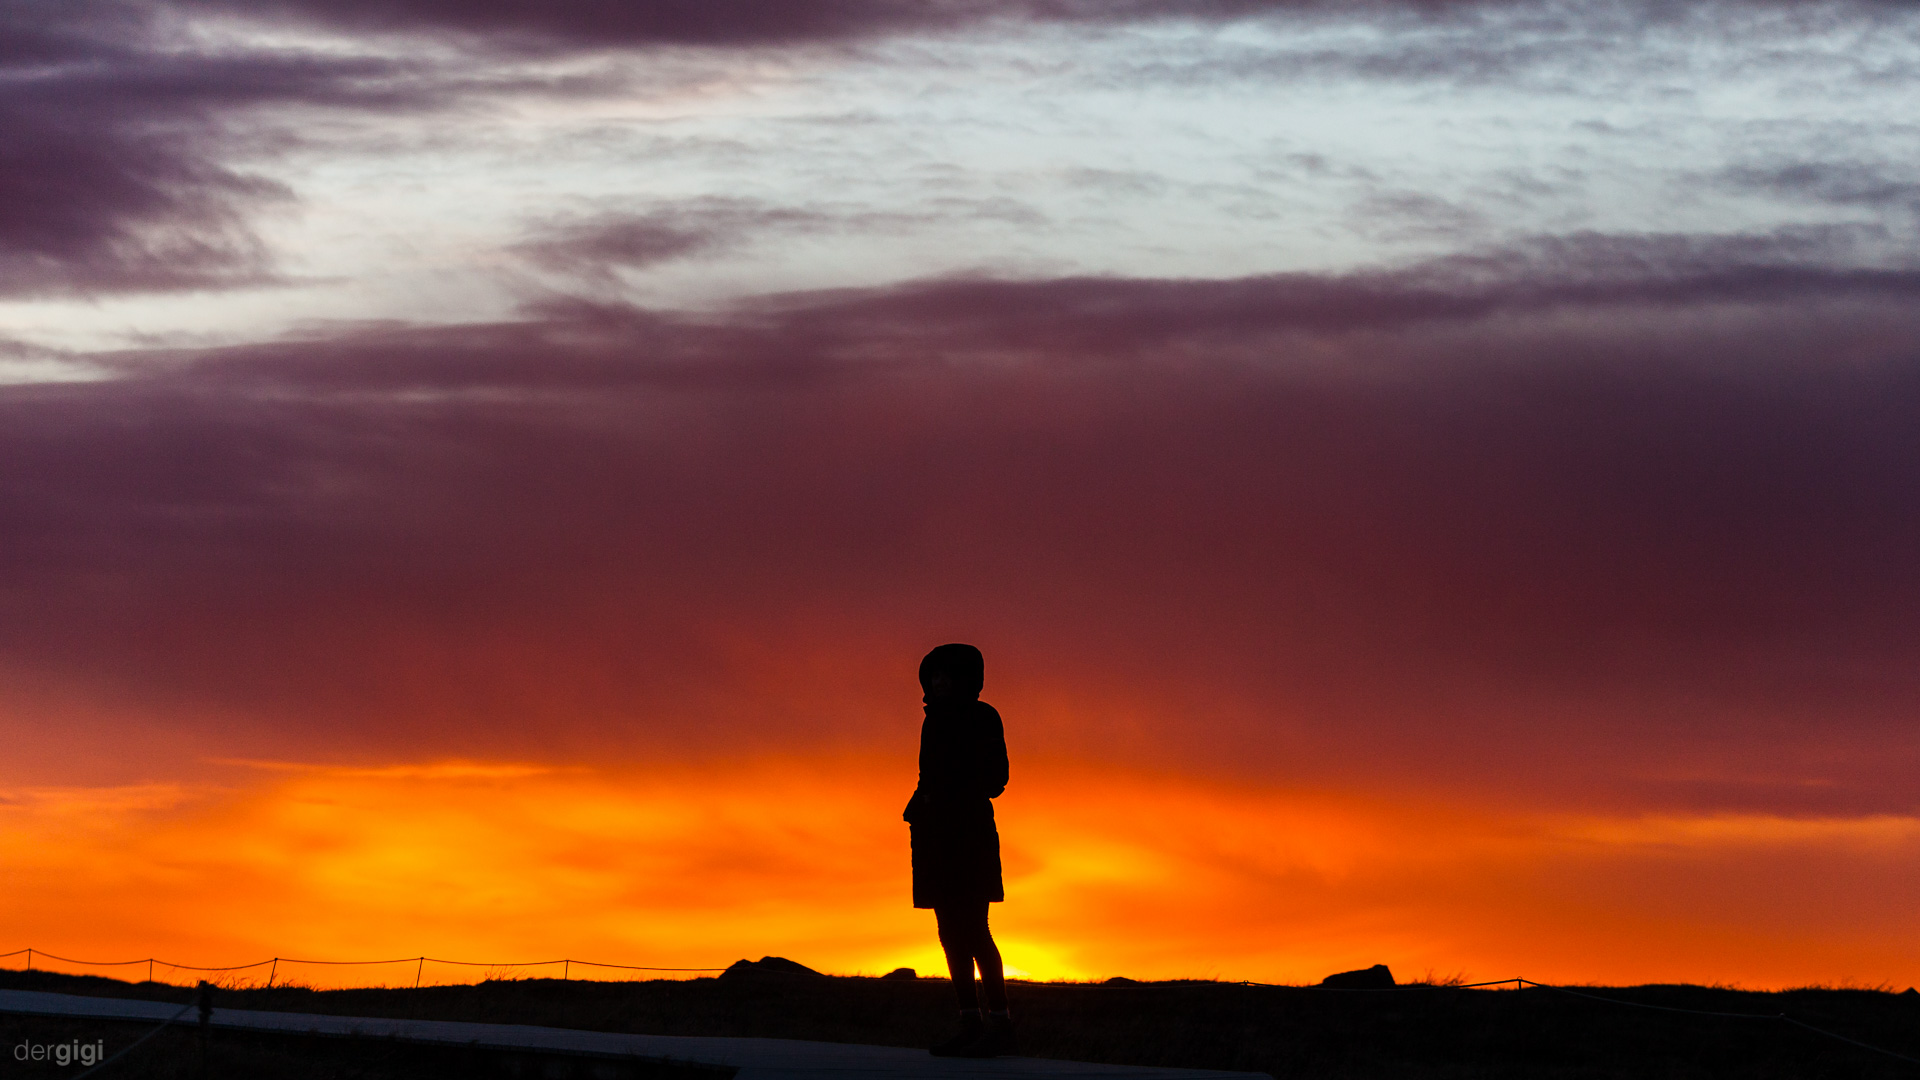 A single silhouette in front of a red sundown